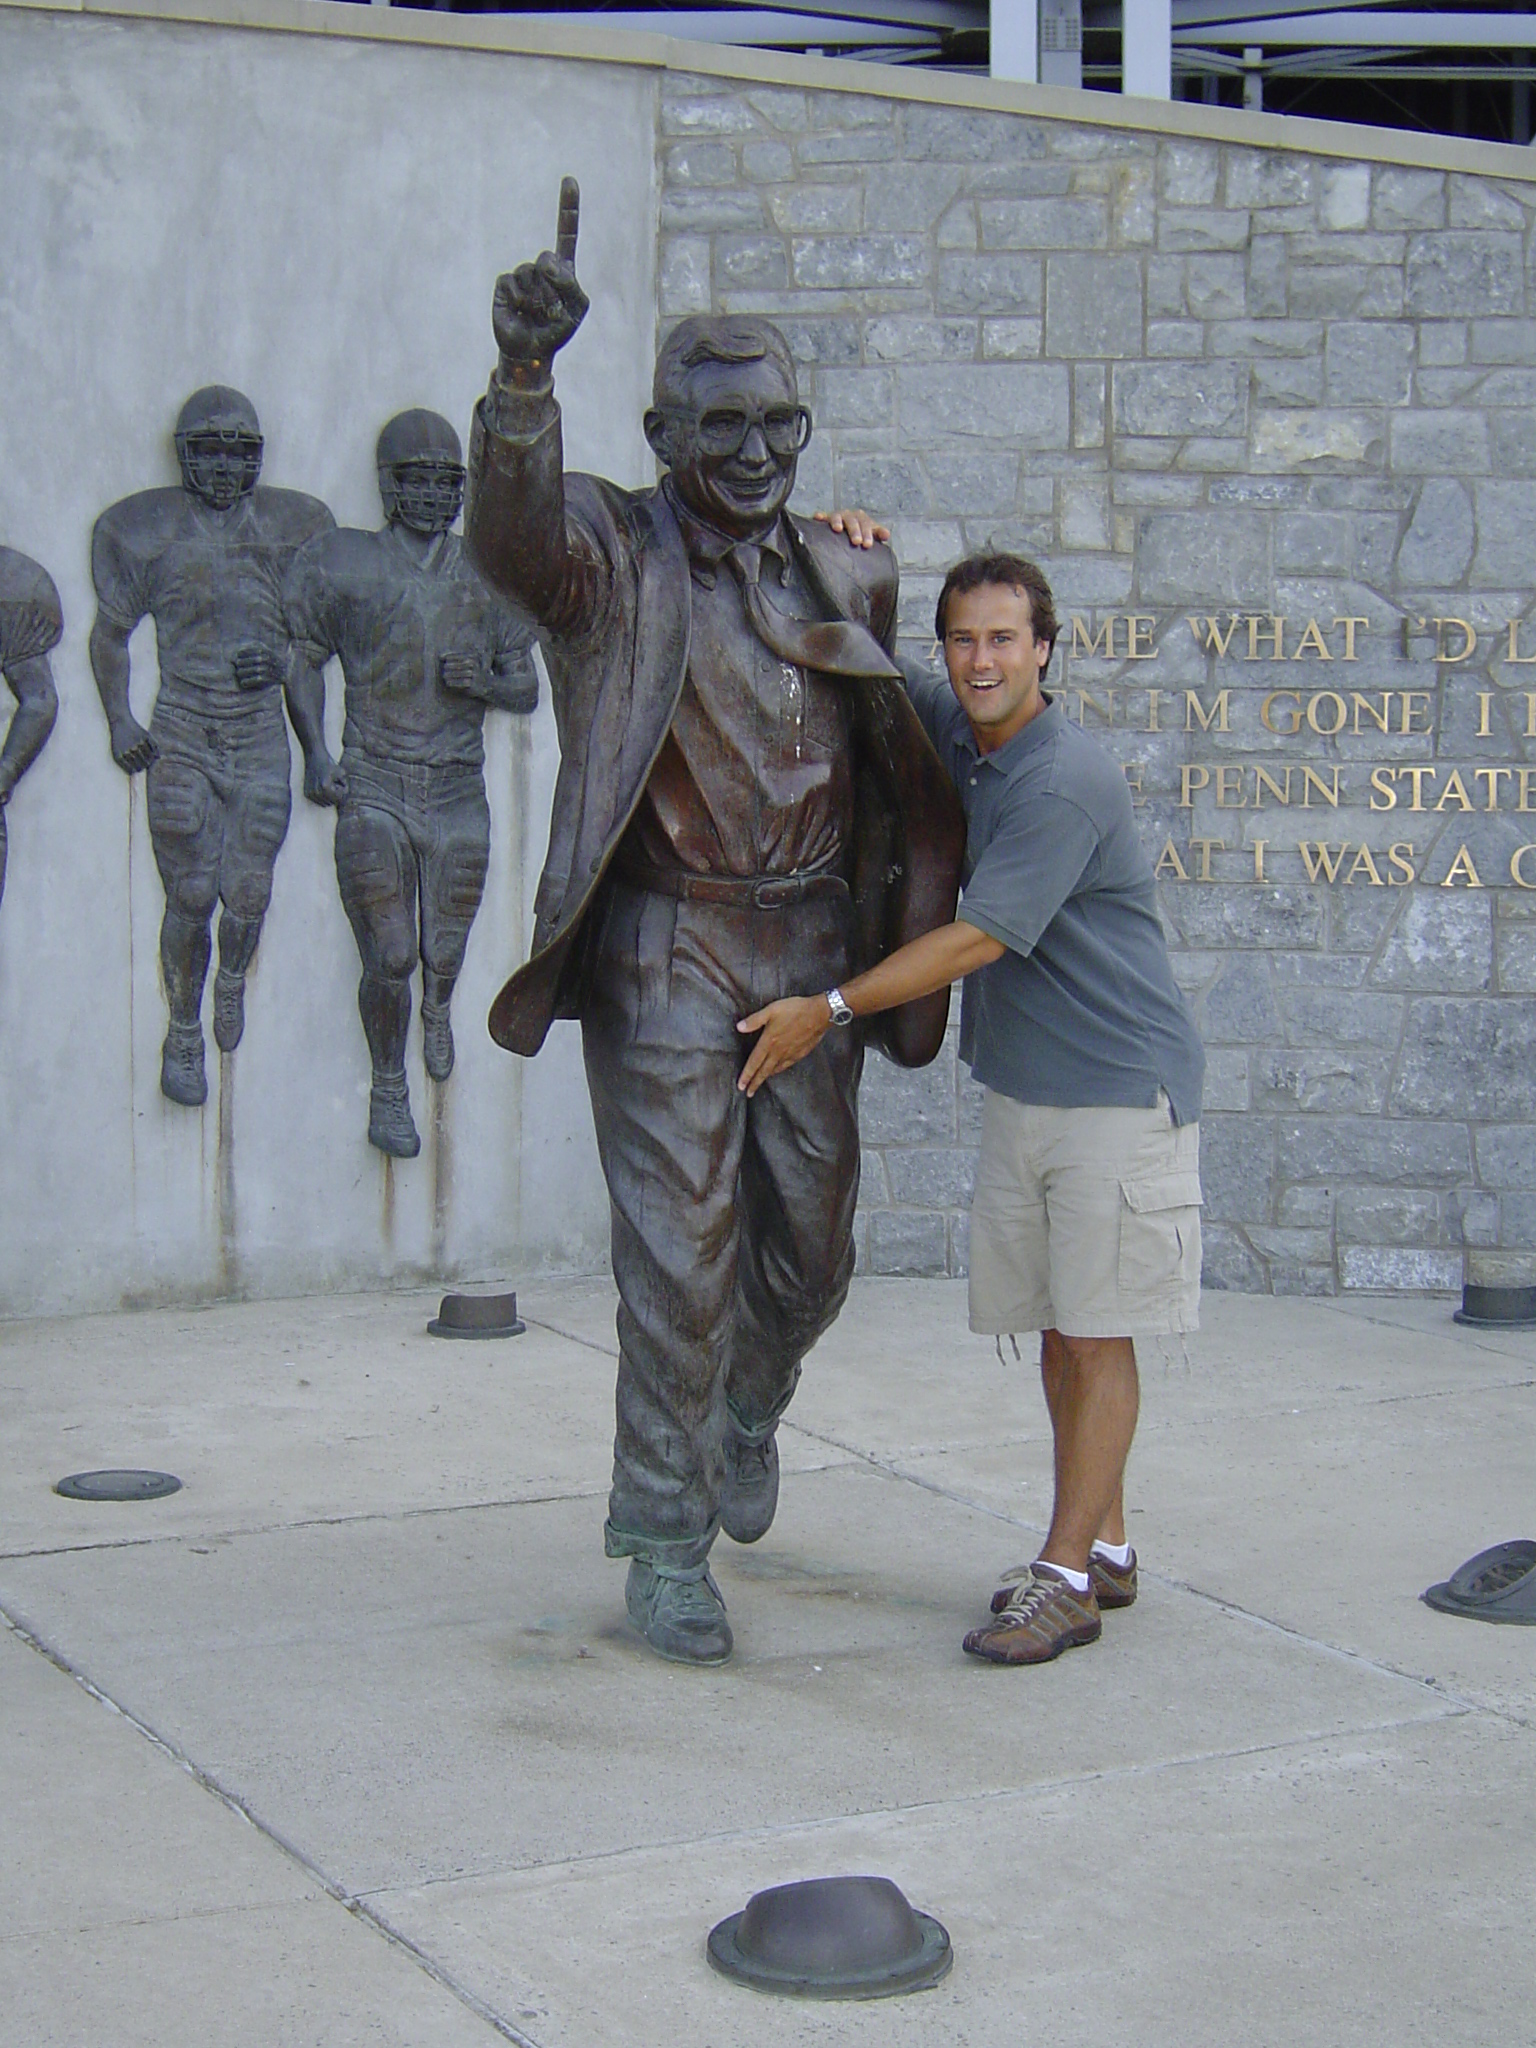 Here's a picture of how JoePa learned about fondling.  When in Happy Valley, do as the Sanduskys do!  Oddly, this picture was taken years before the scandal.